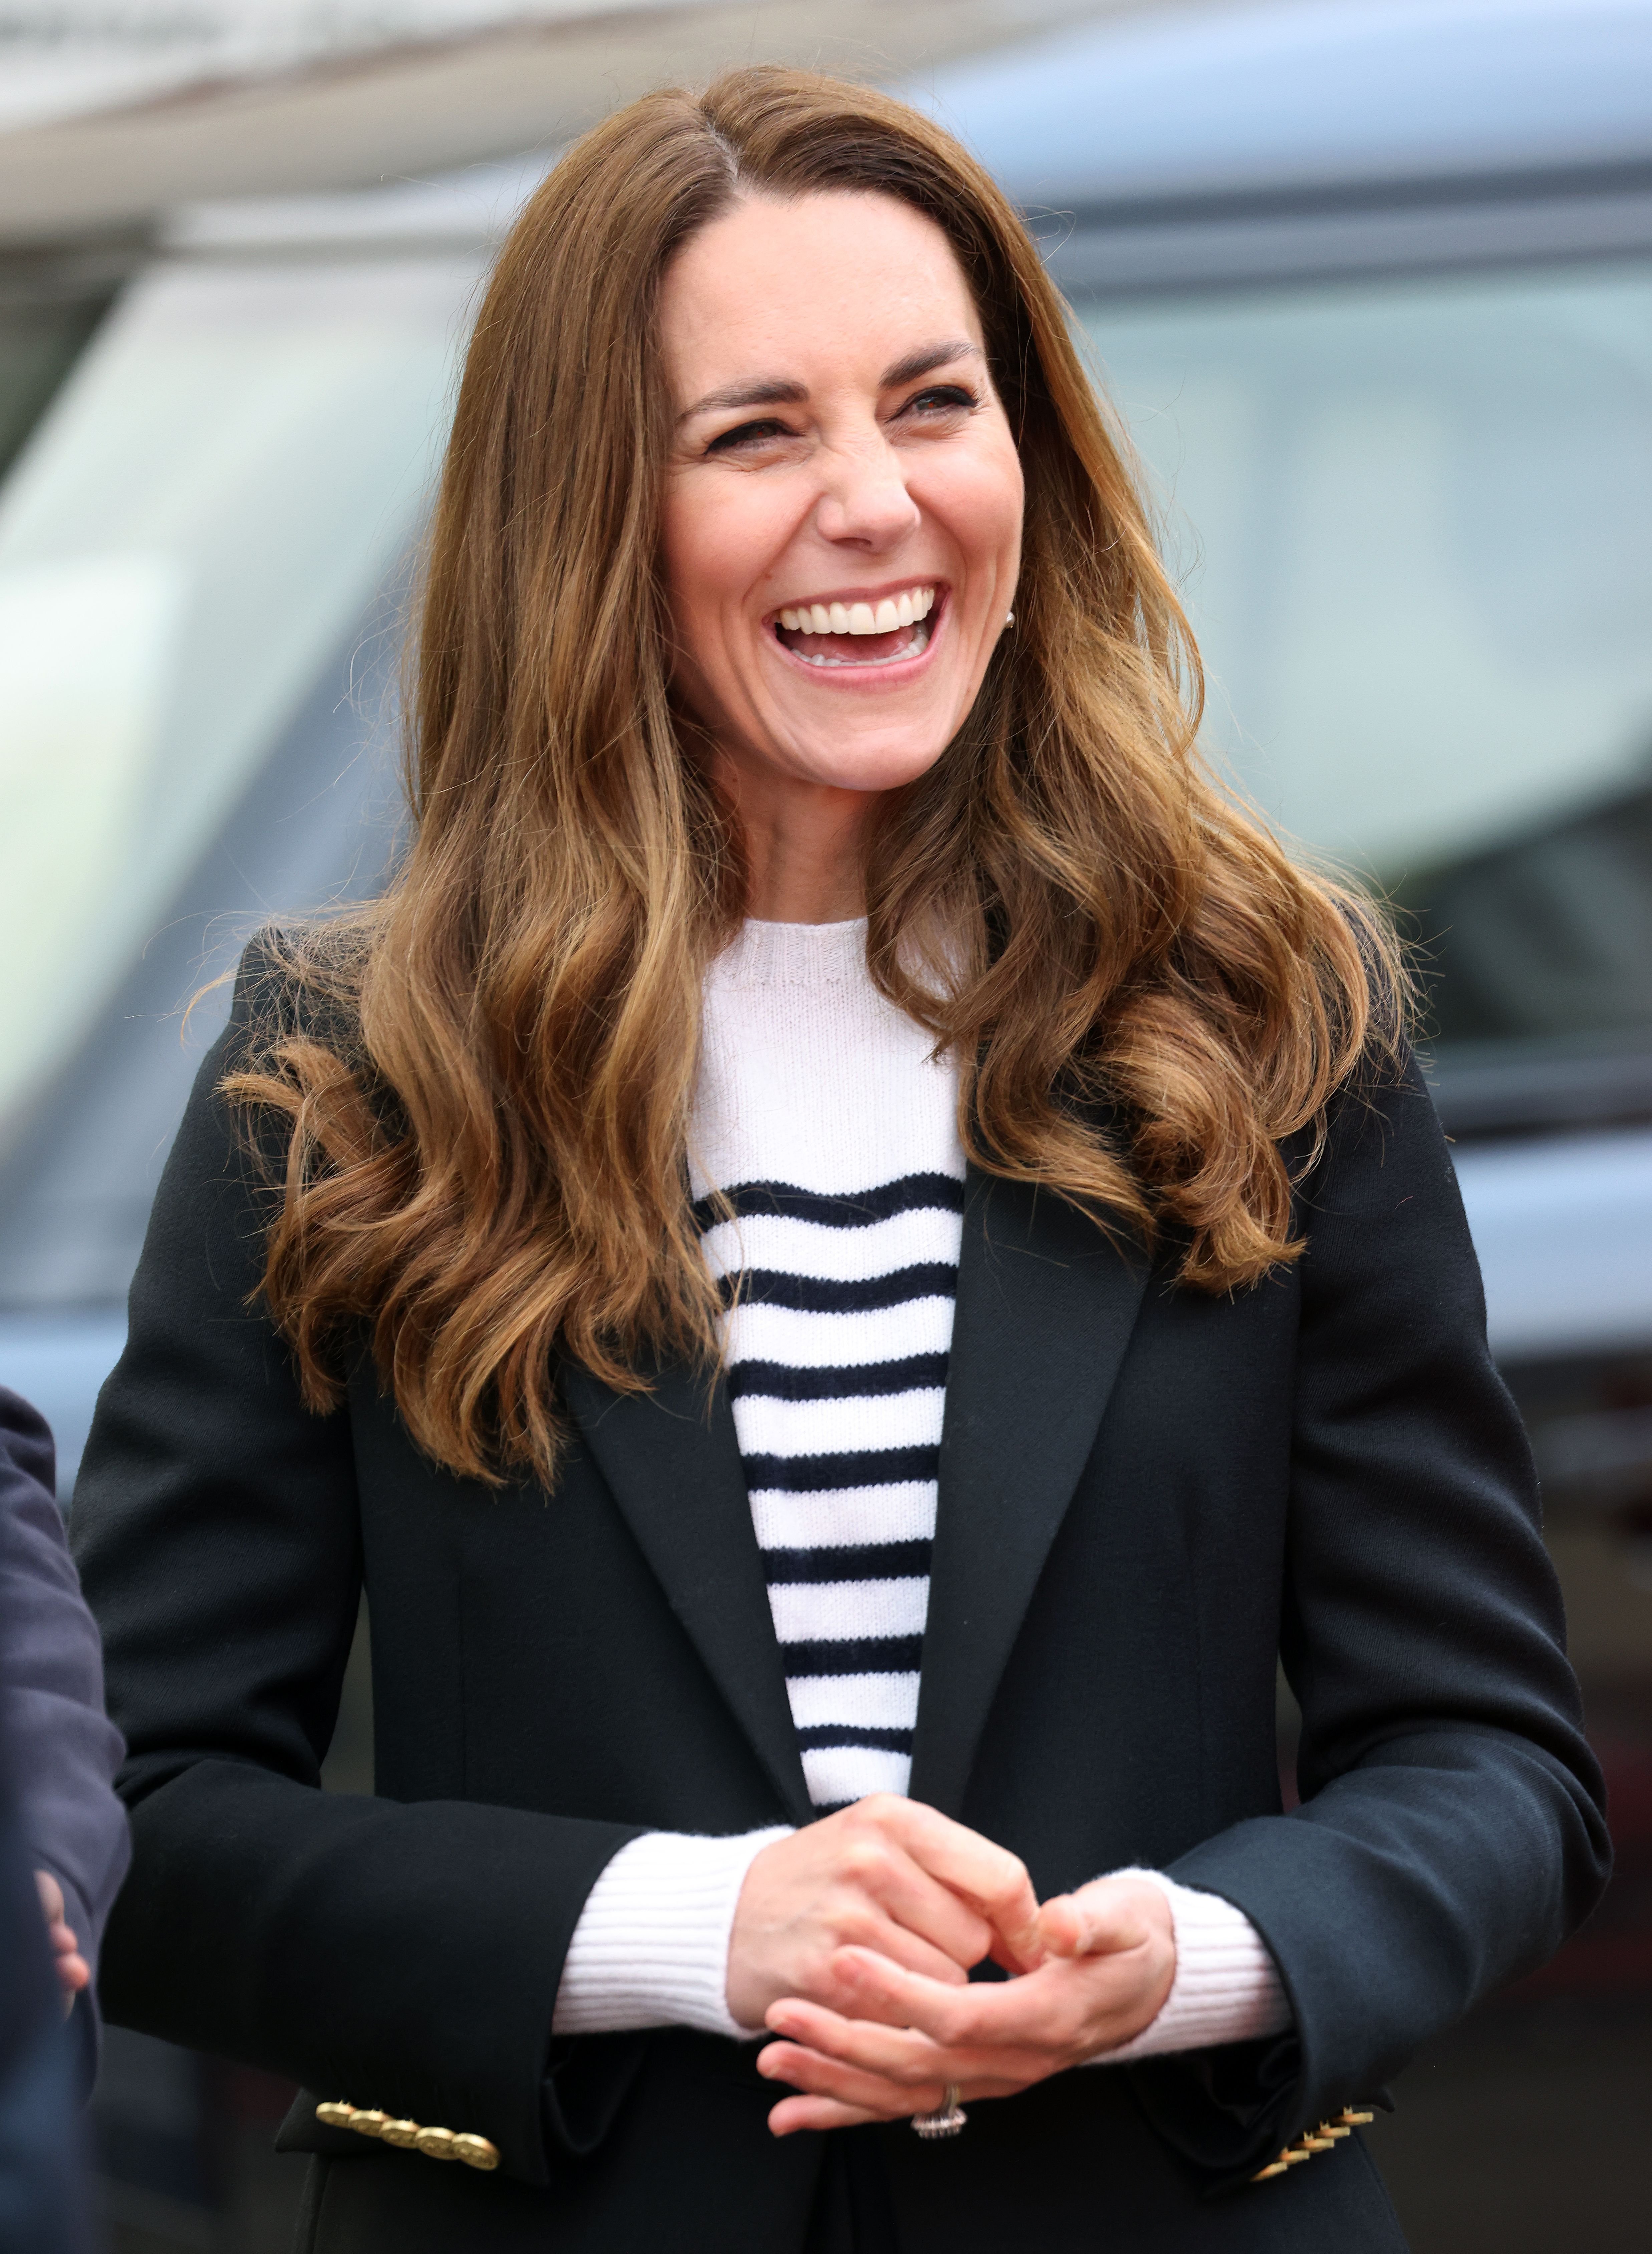 Kate Middleton meeting local fishermen and their families to hear about the work of fishing communities in the village of Pittennweem with Prince William, Duke of Cambridge on day six of their week long visit to Scotland on May 26, 2021 | Getty Images